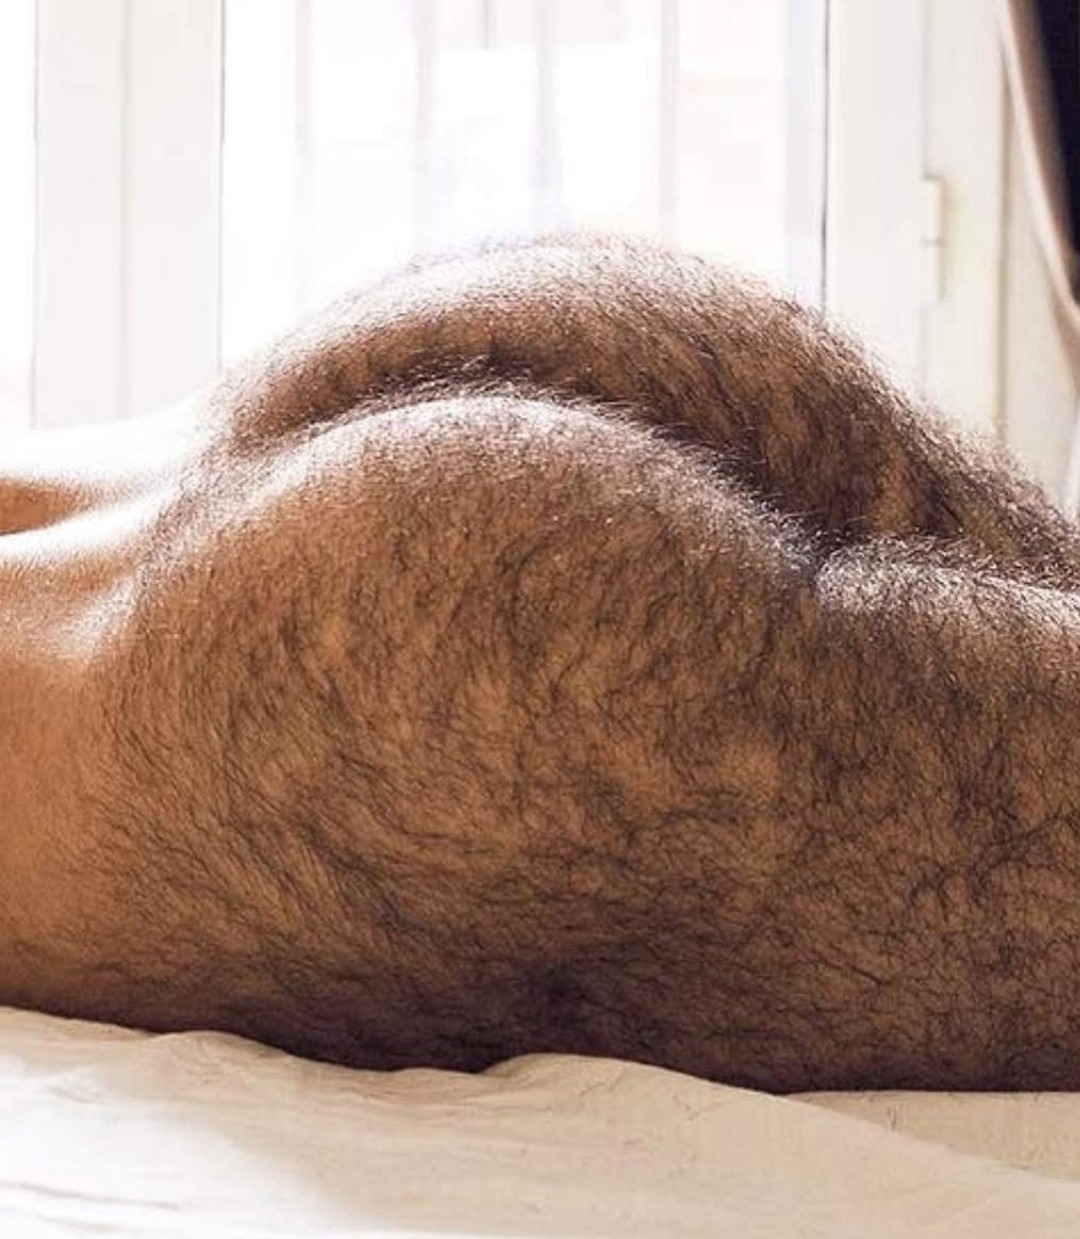 moustache35:What a hairy Ass  🚜🚜🍑🍑🛠🛠🧢🧢🌽💦💦 porn pictures